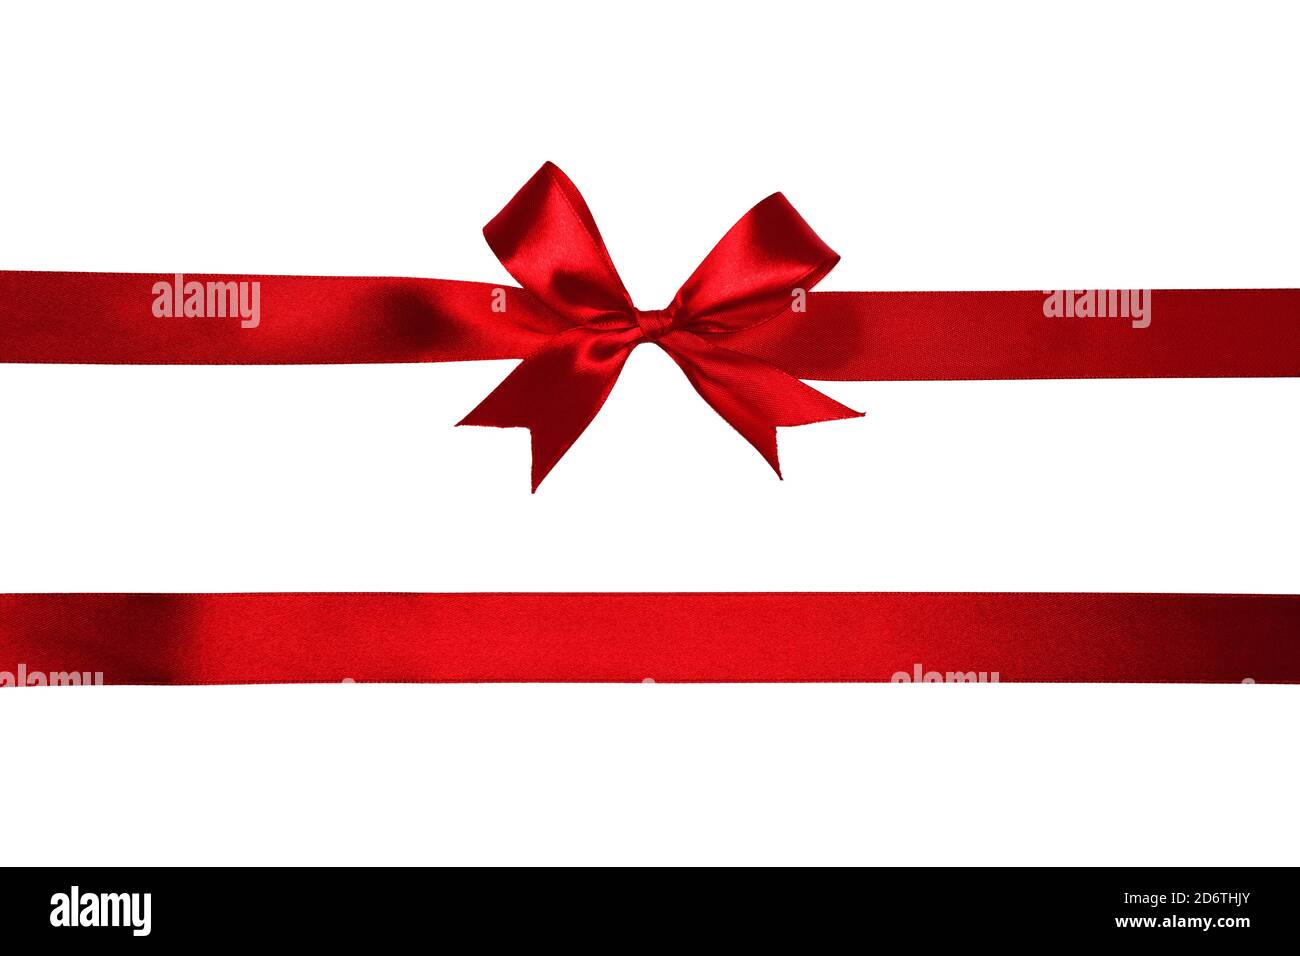 Red satin bow and ribbon isolated on white background Stock Photo